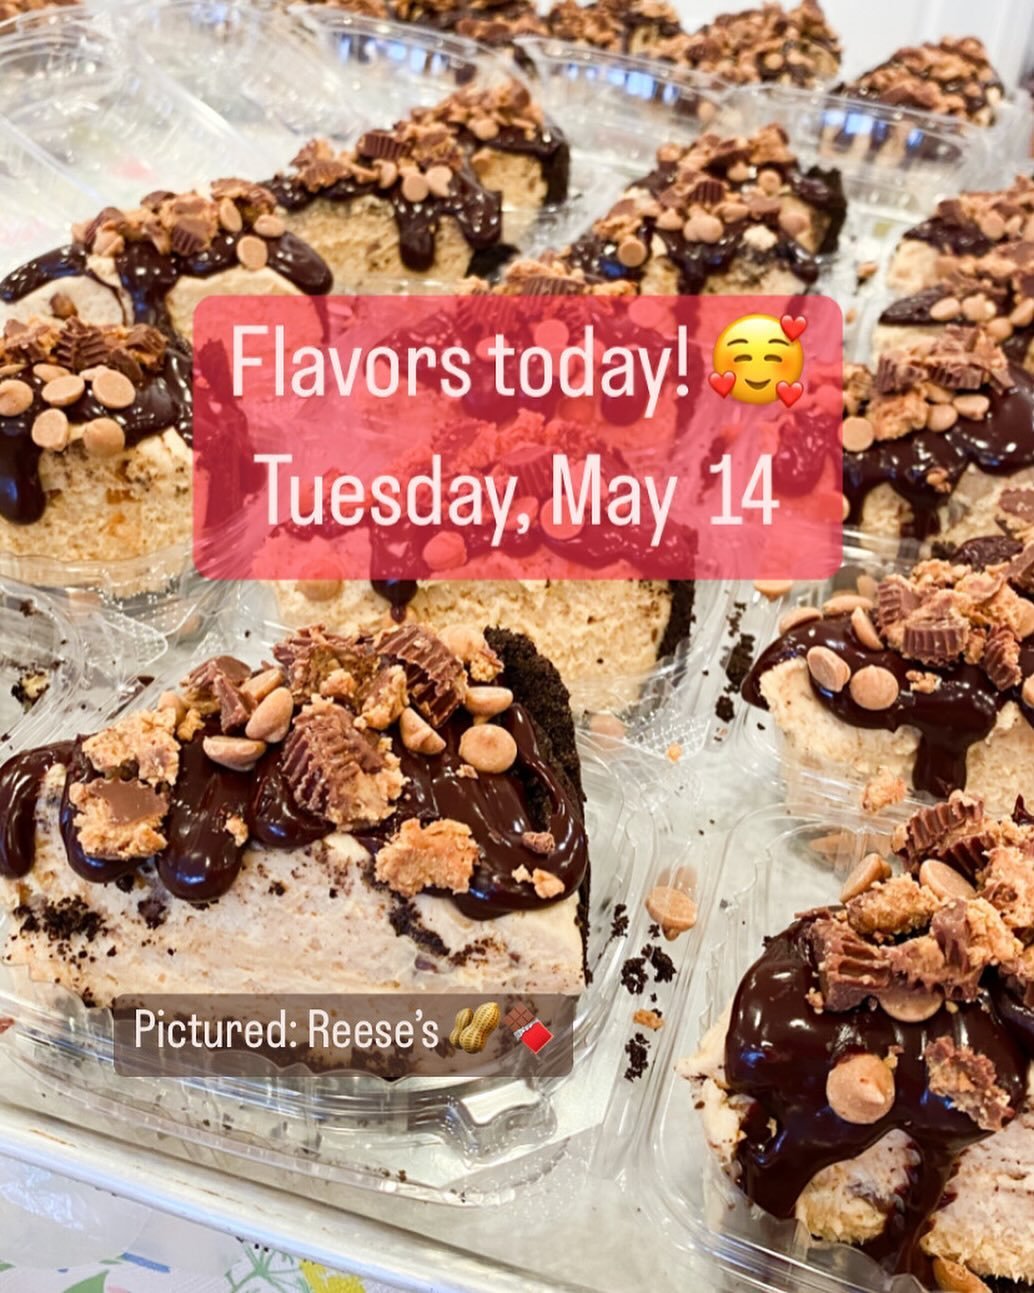 Good morning! ☀️ We can&rsquo;t wait to see you on this beautiful Tuesday! 💖✨💖✨
Fun fact: We&rsquo;re working on even more new flavors!!! Any guesses? 👀 My team has so much fun being creative with new flavors each week 🥰
Flavors today ⤵️
Slices:
